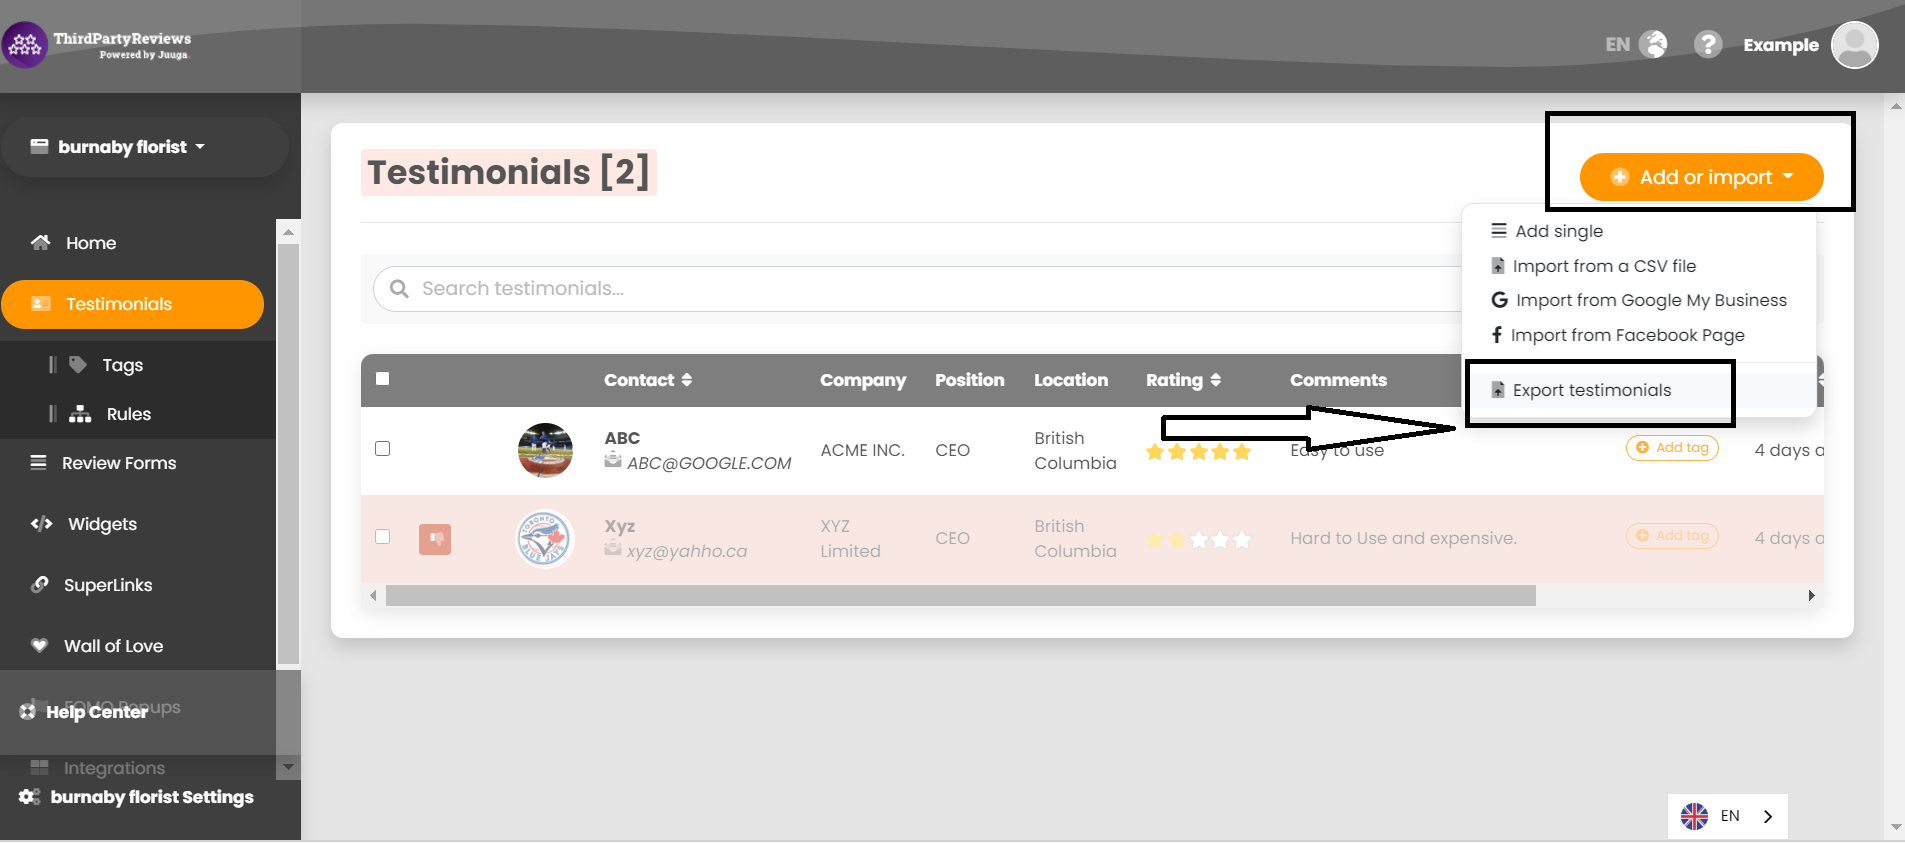 Then, click on Add or Import icon on the right top side of the page and select Export Testimonials from the down menu.